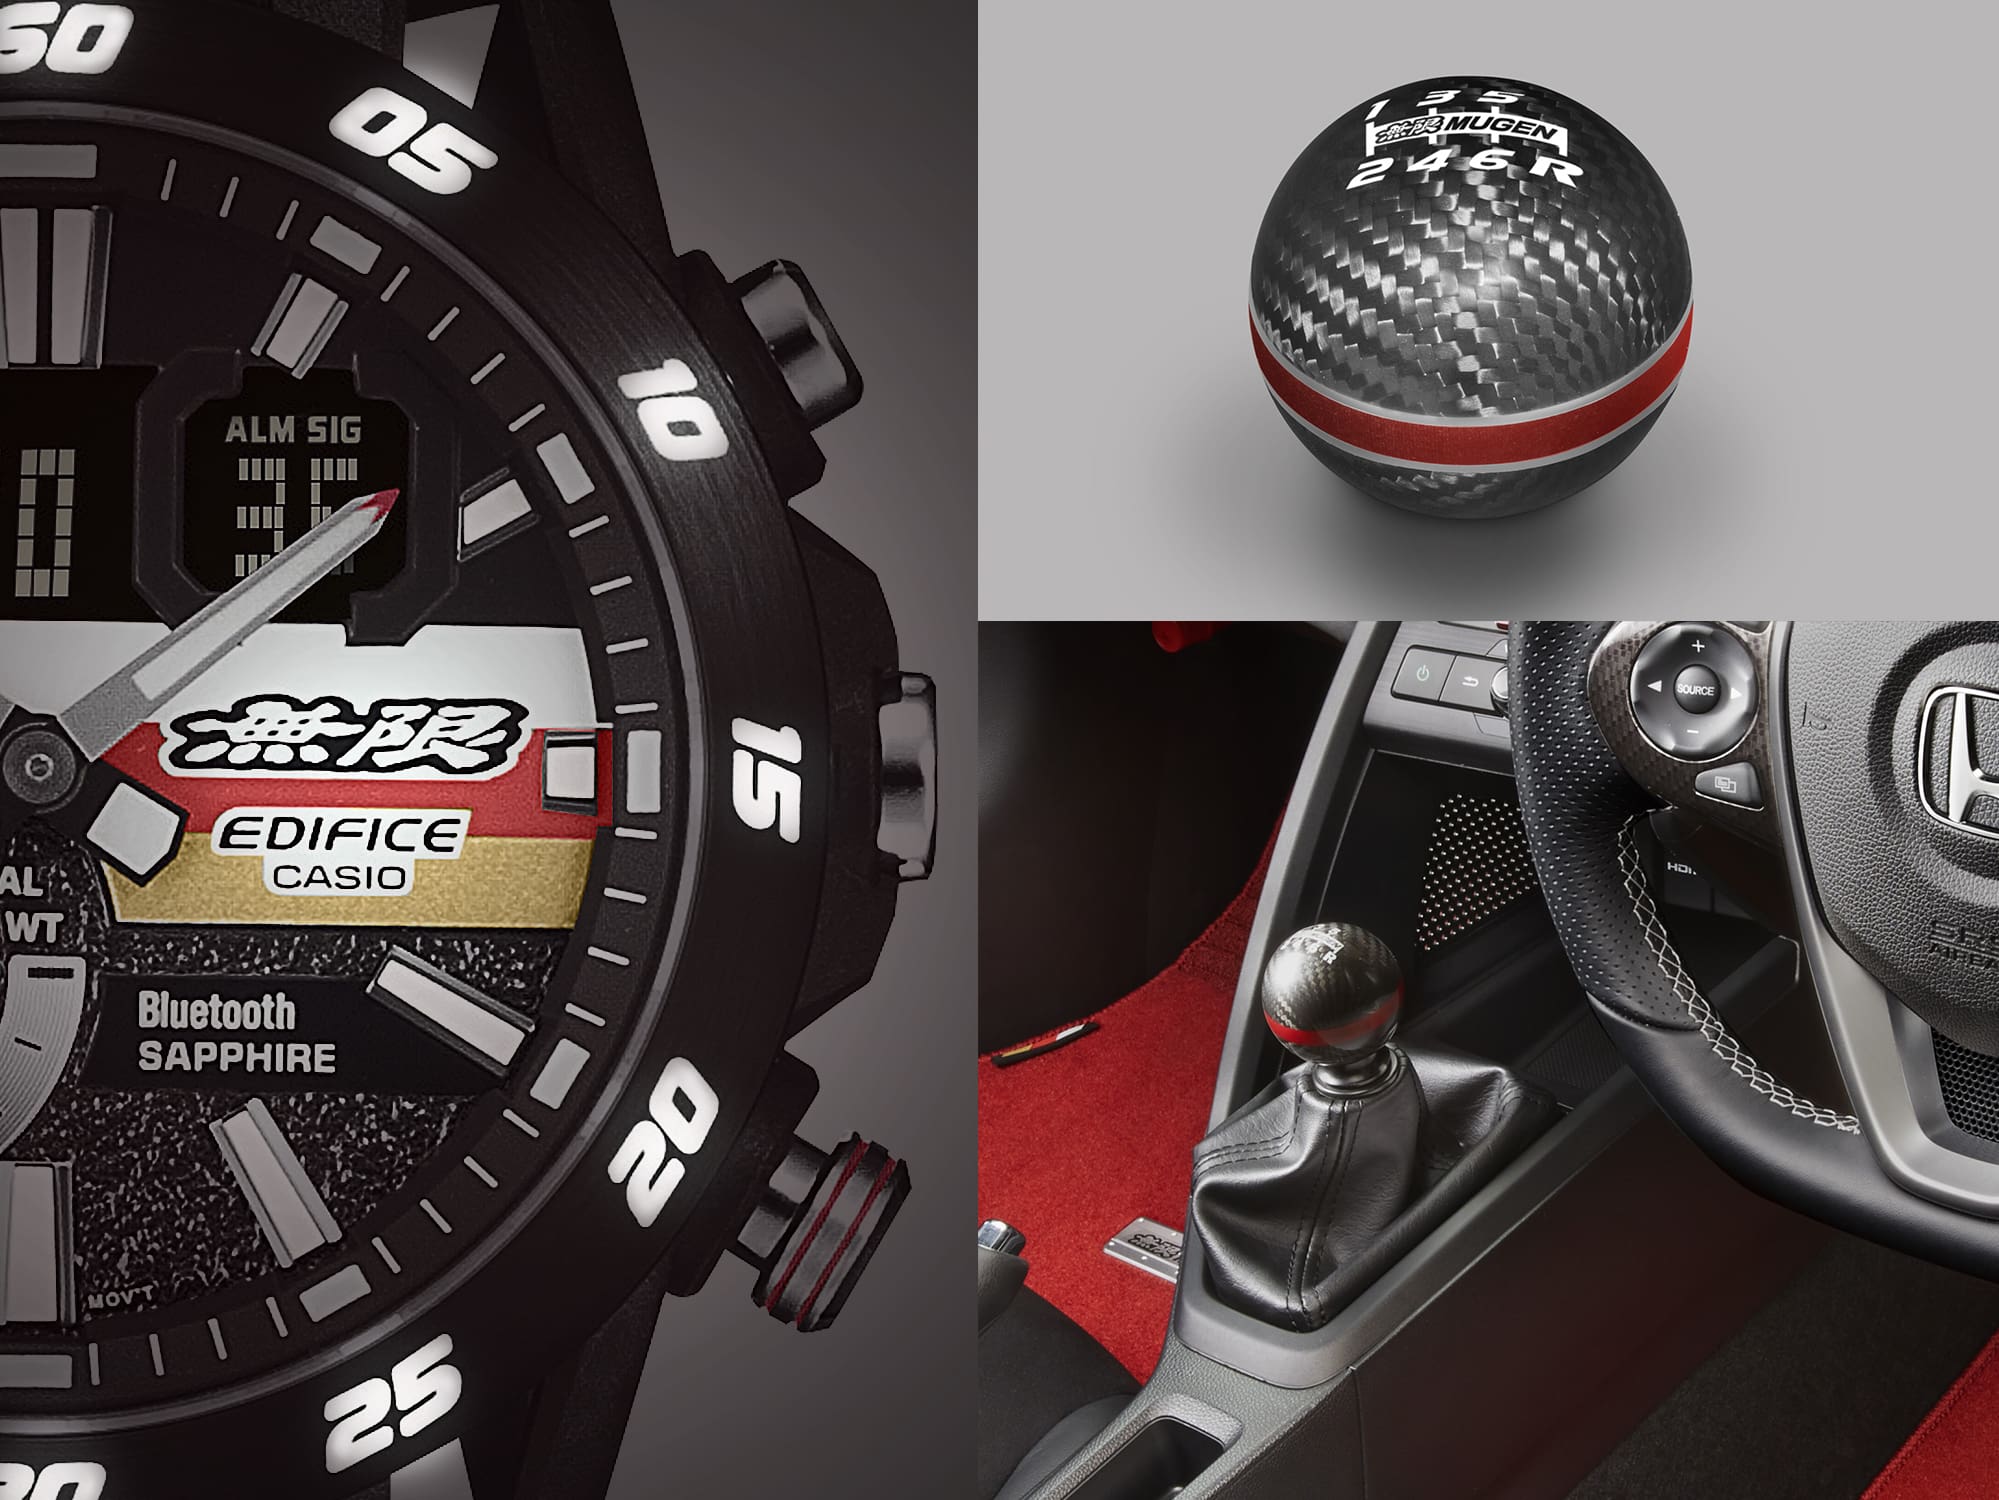 ECB-40MU Edifice watch collage with carbon fiber shifter knob and race car console